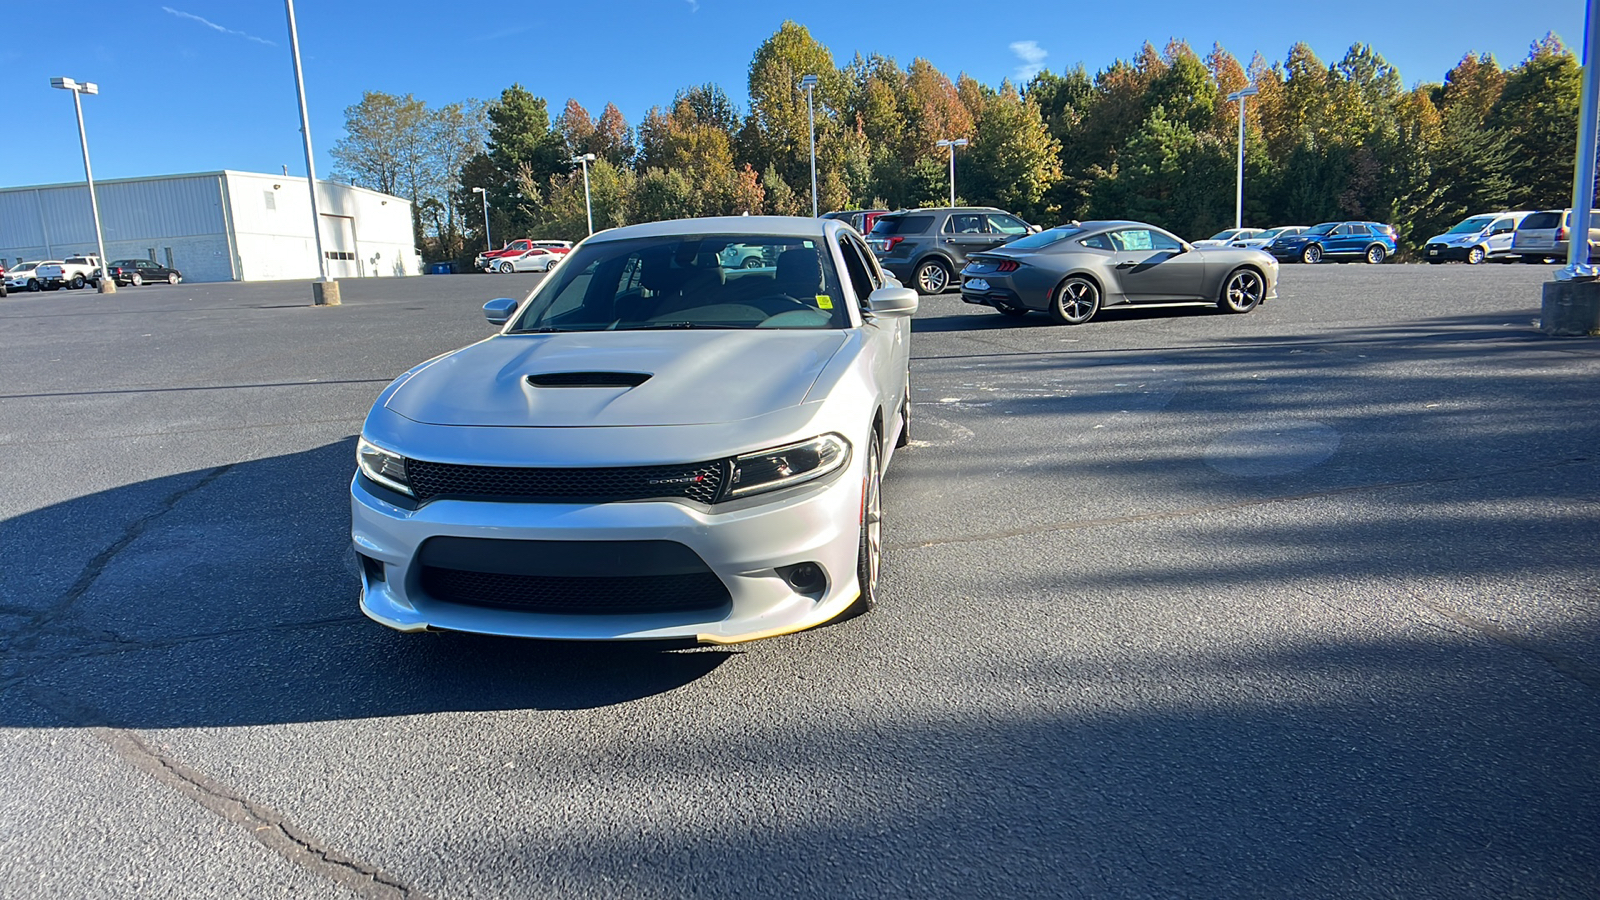 2022 Dodge Charger GT 3